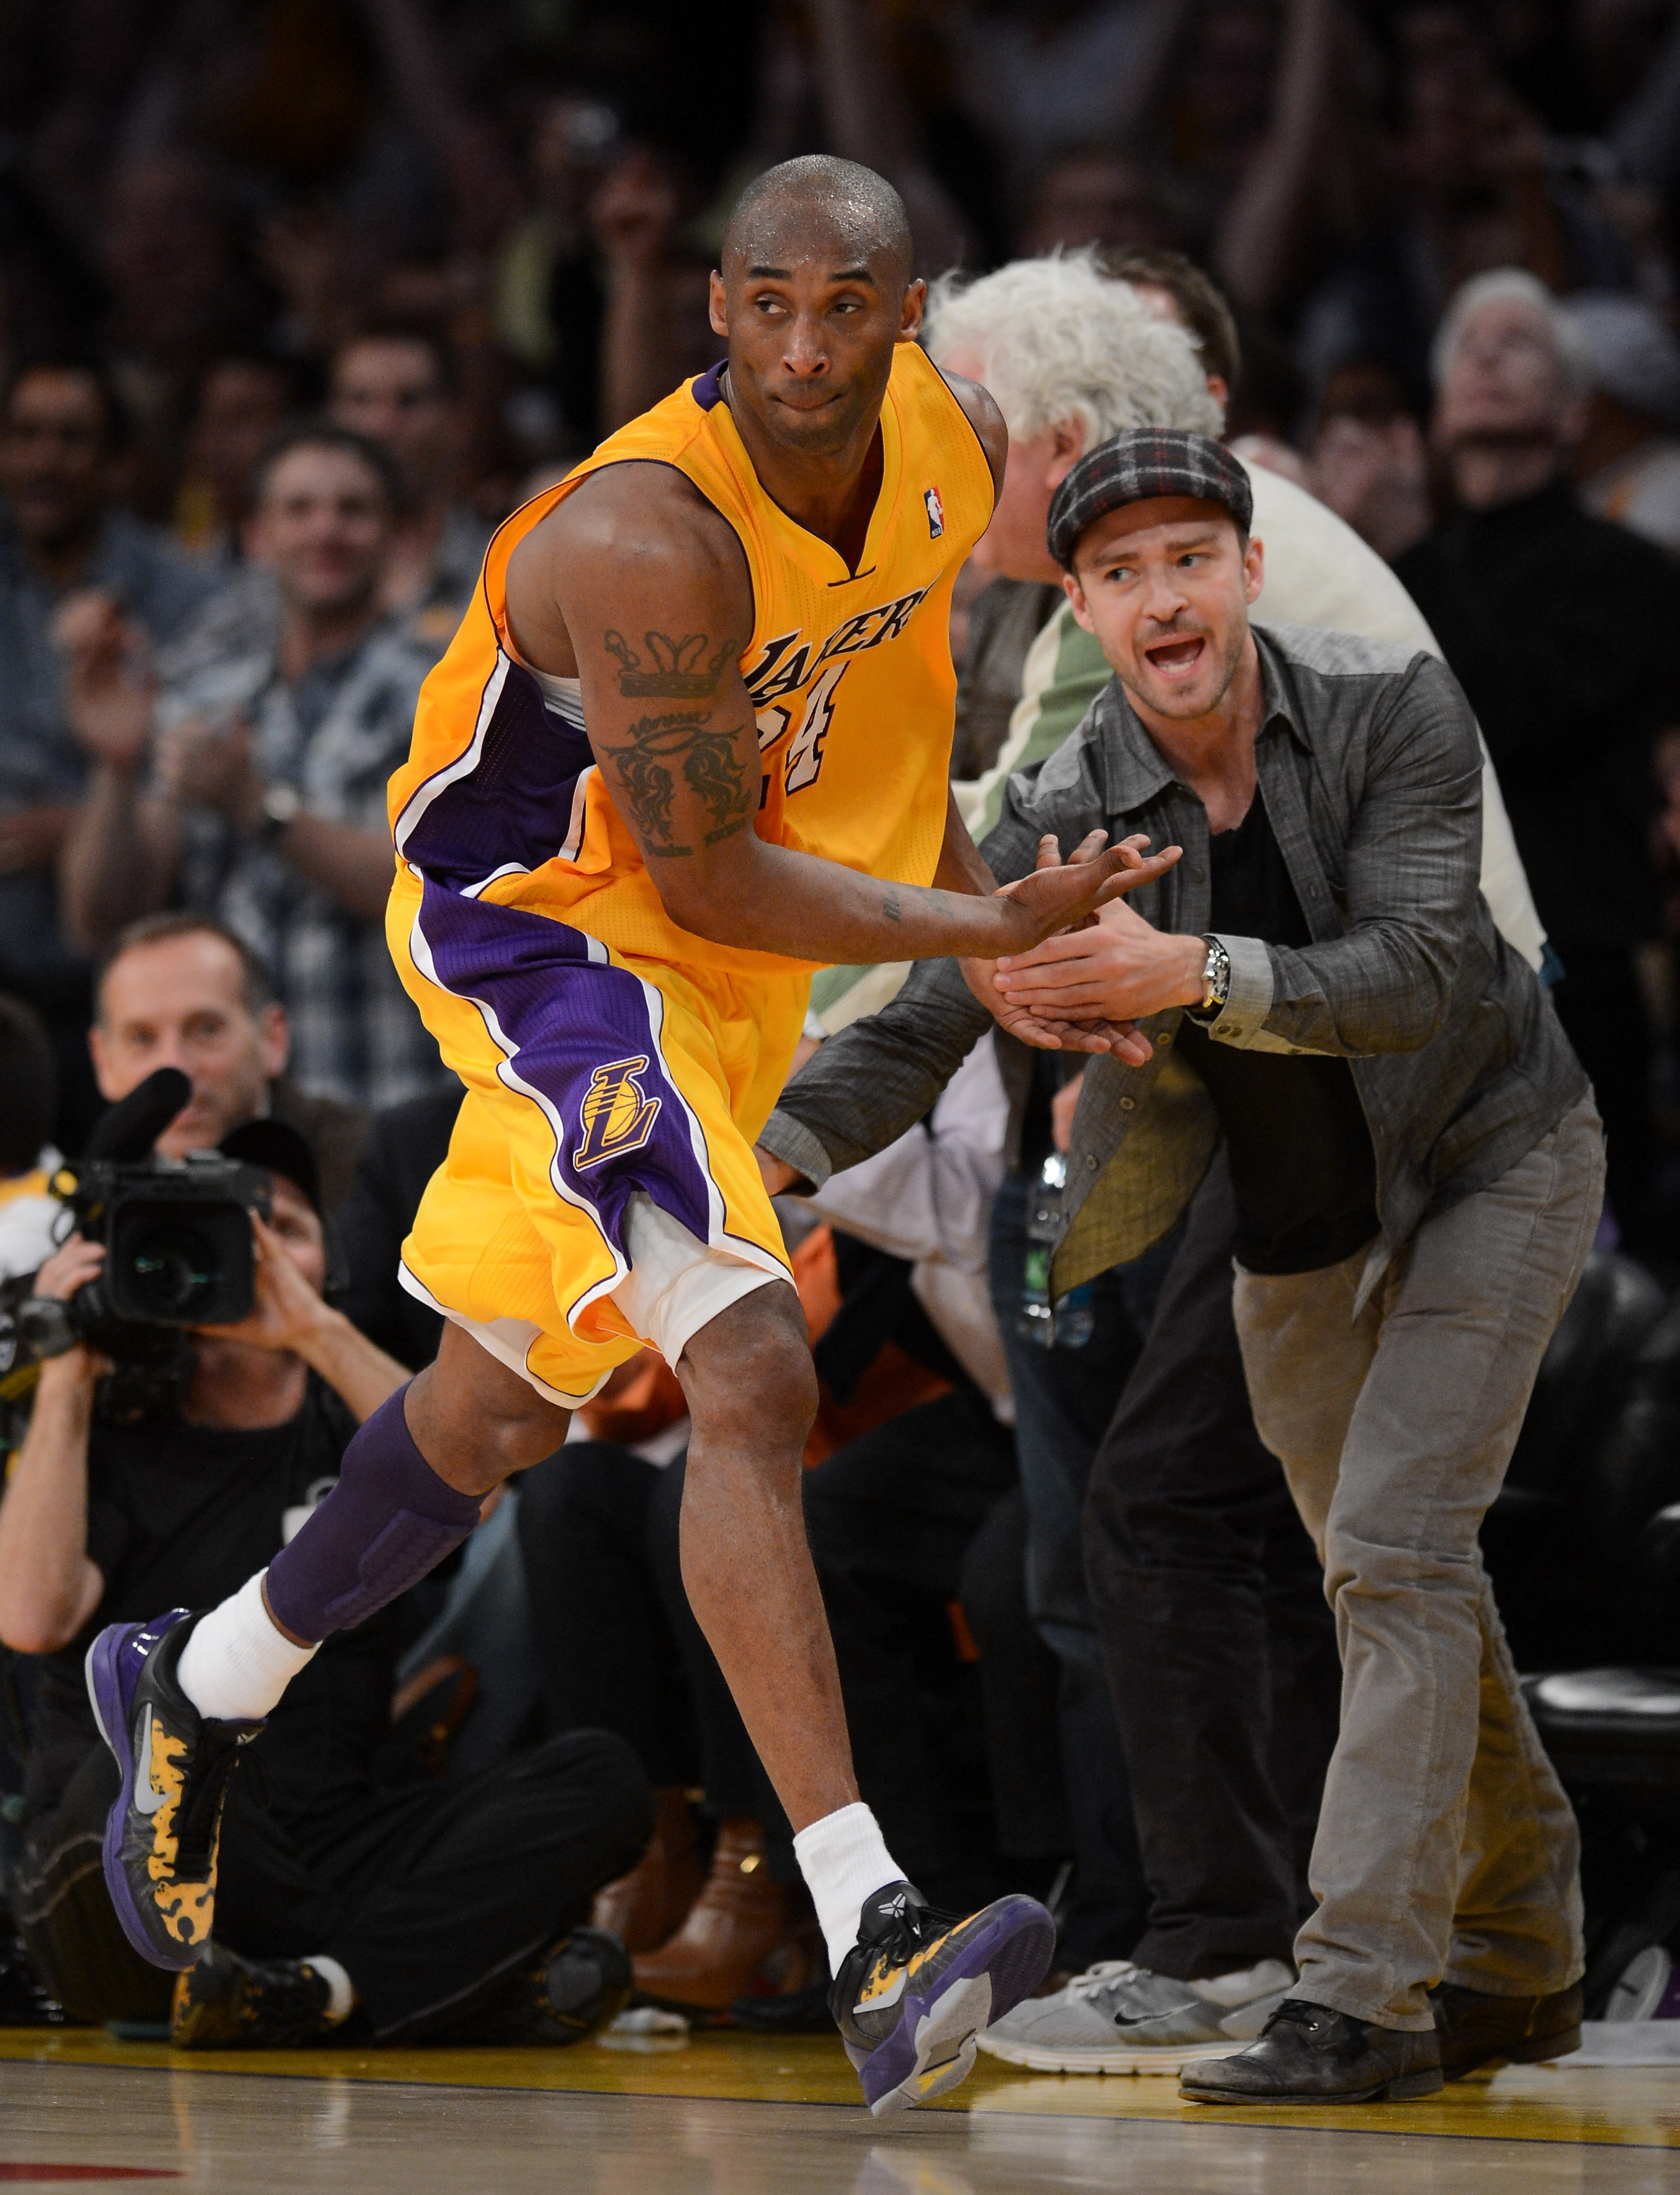 Los Angeles Lakers' Kobe Bryant (24) is greeted by Justin Timberlake after scoring during Game 7 of a 2012 NBA basketball playoff game against the Denver Nuggets on May 12, 2012 at Staples Center in Los Angeles.